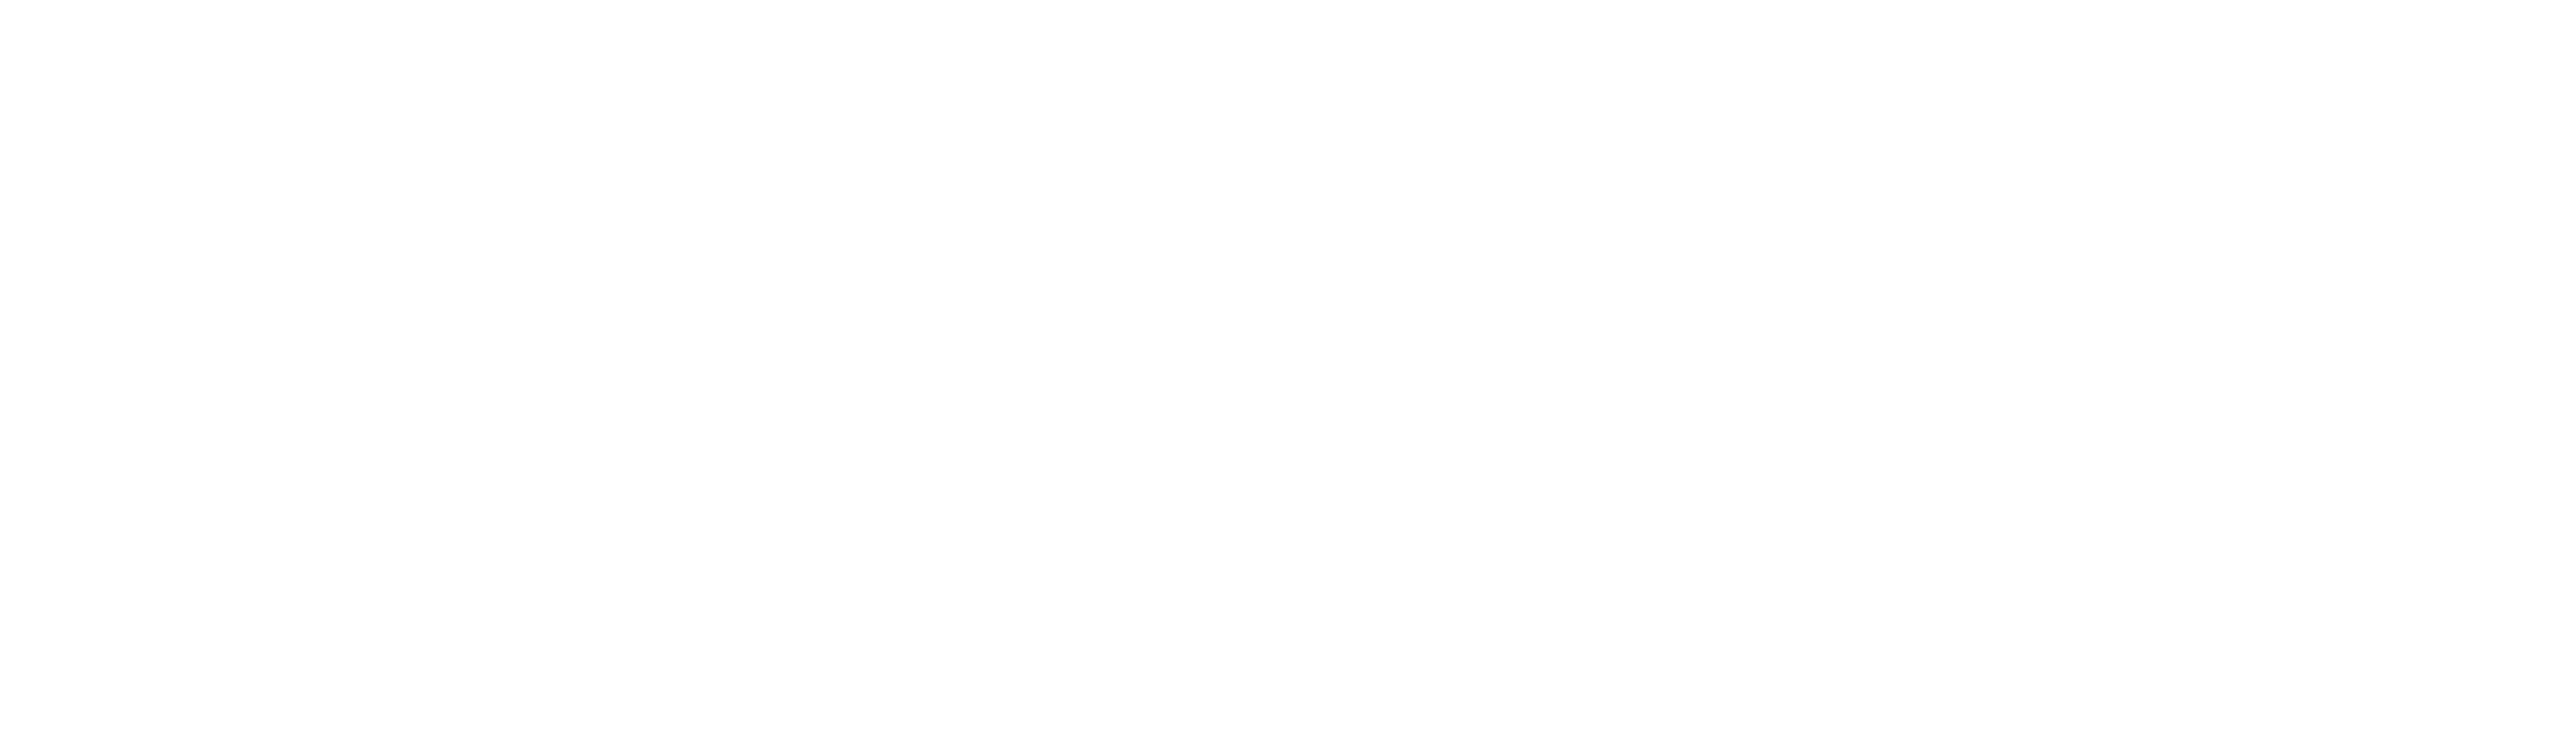 Markgraf Consulting